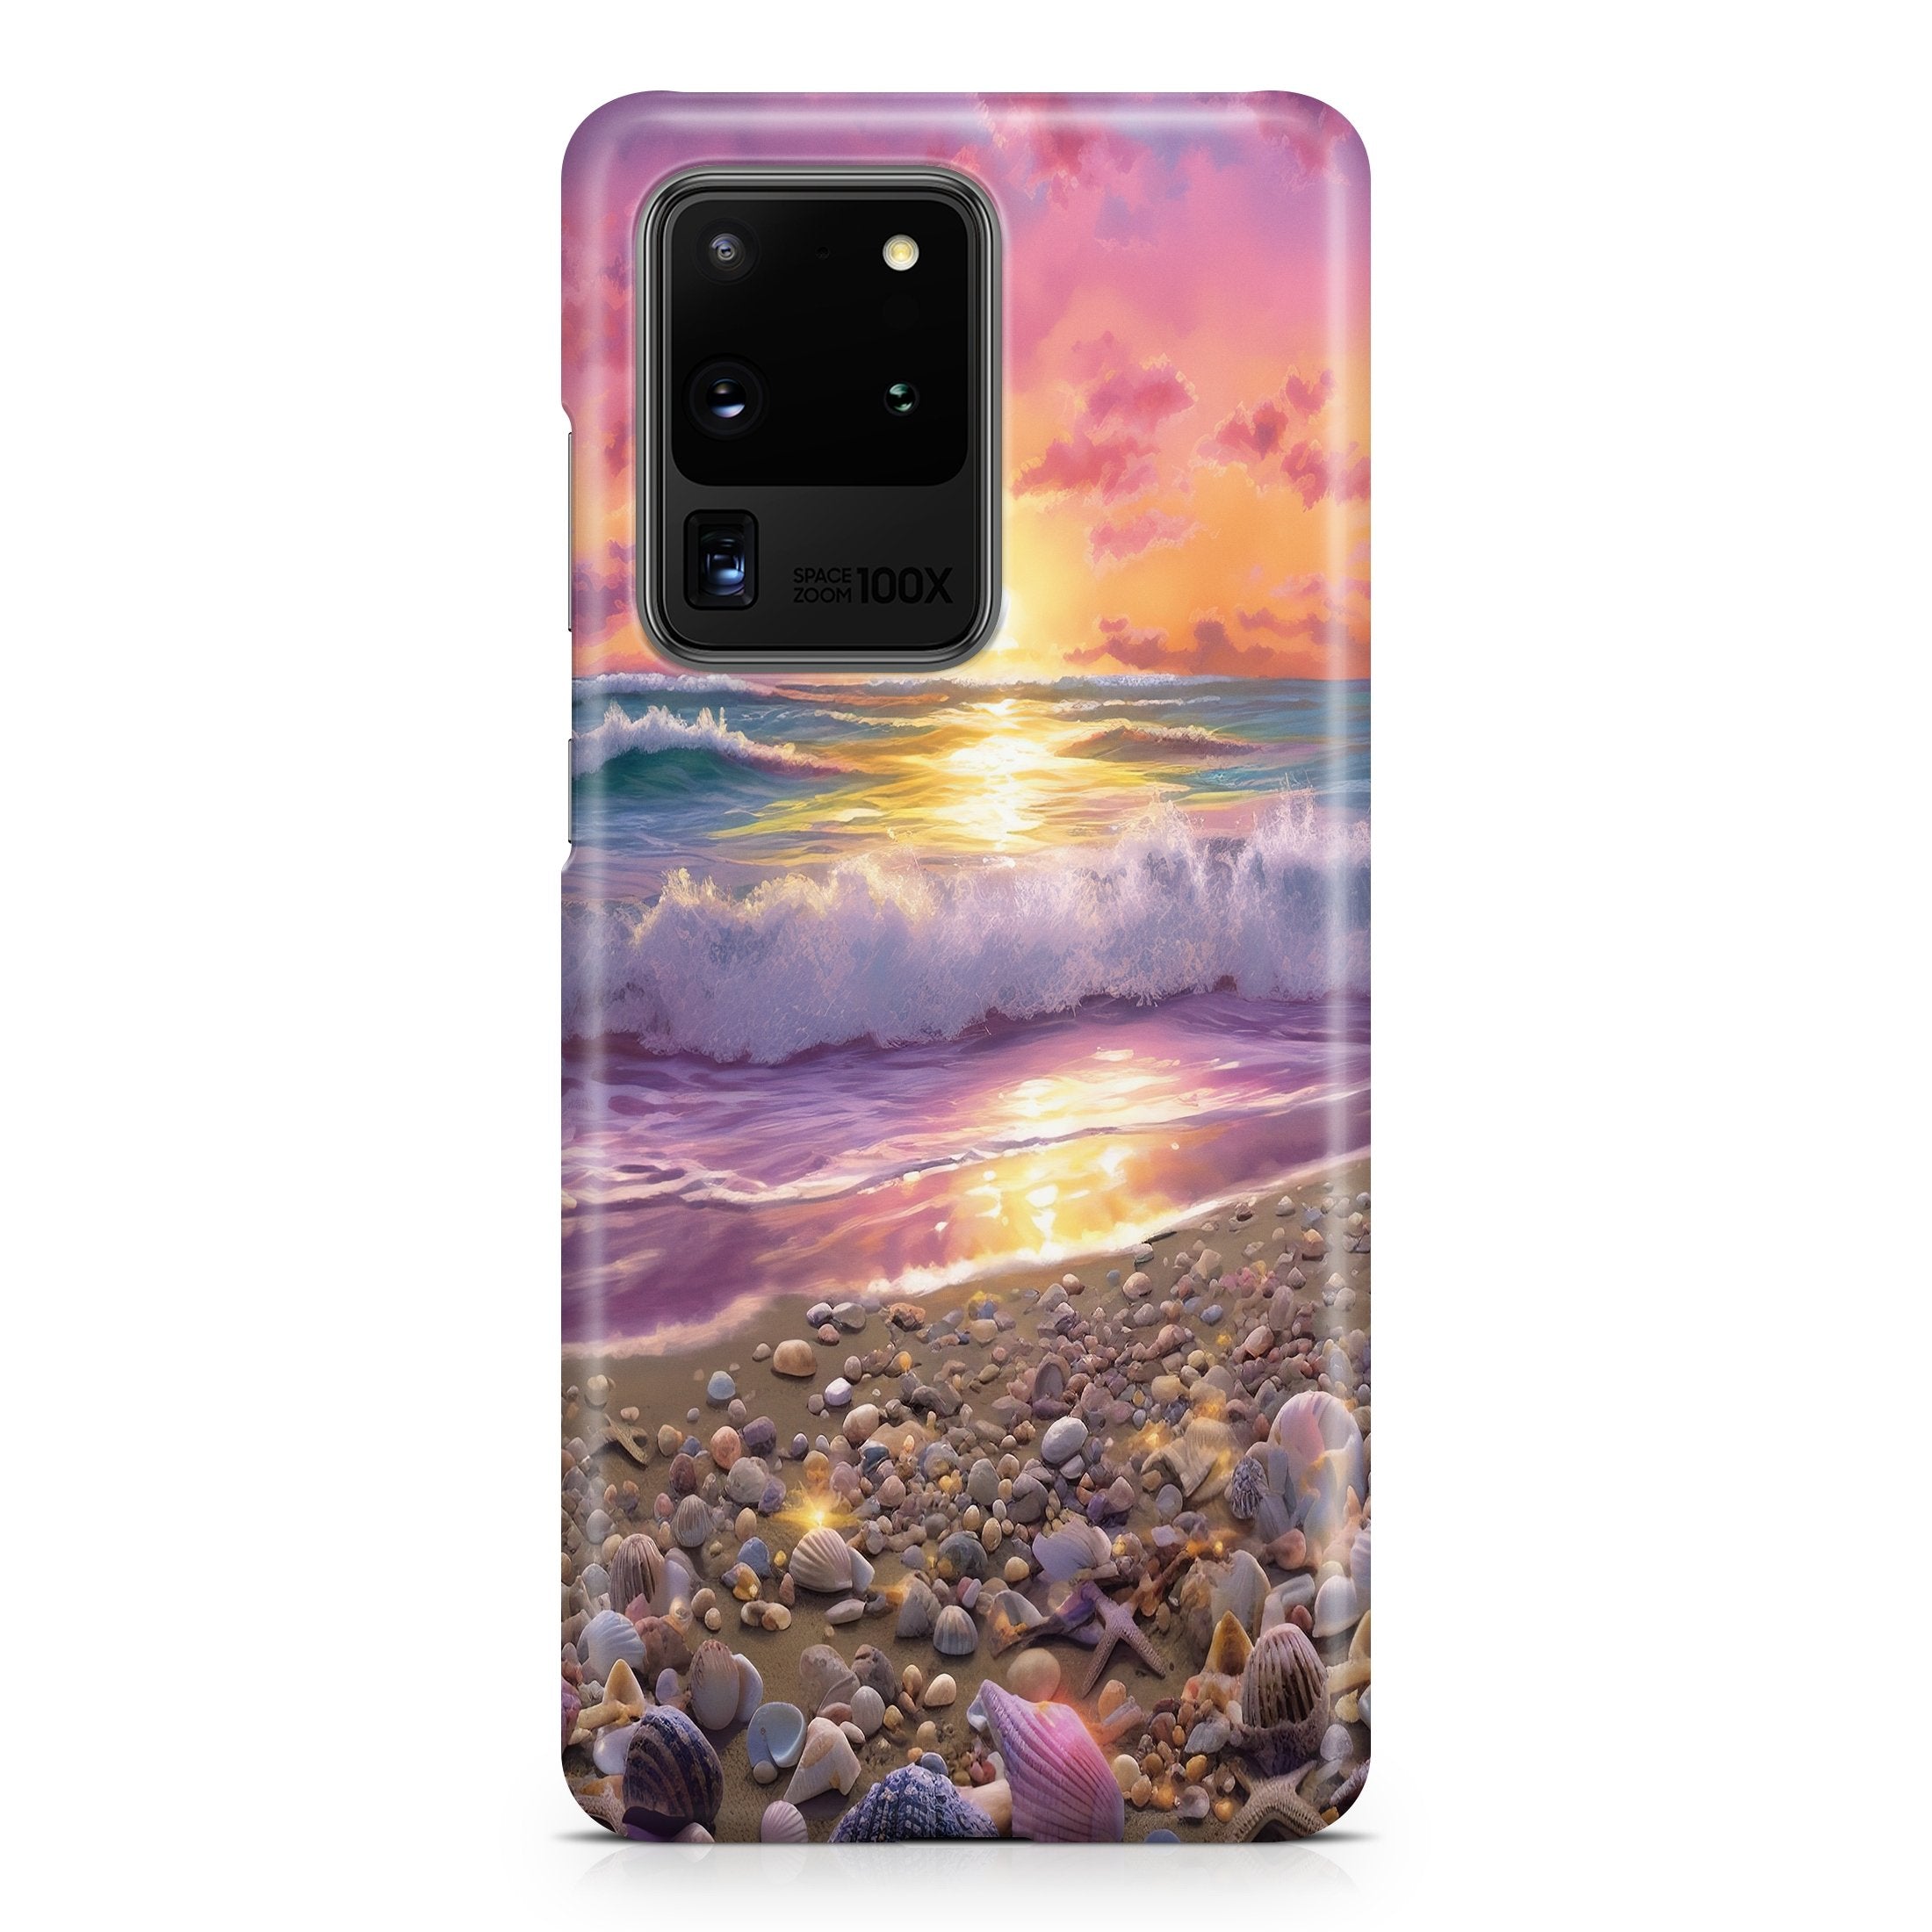 Summer Dreams - Samsung phone case designs by CaseSwagger